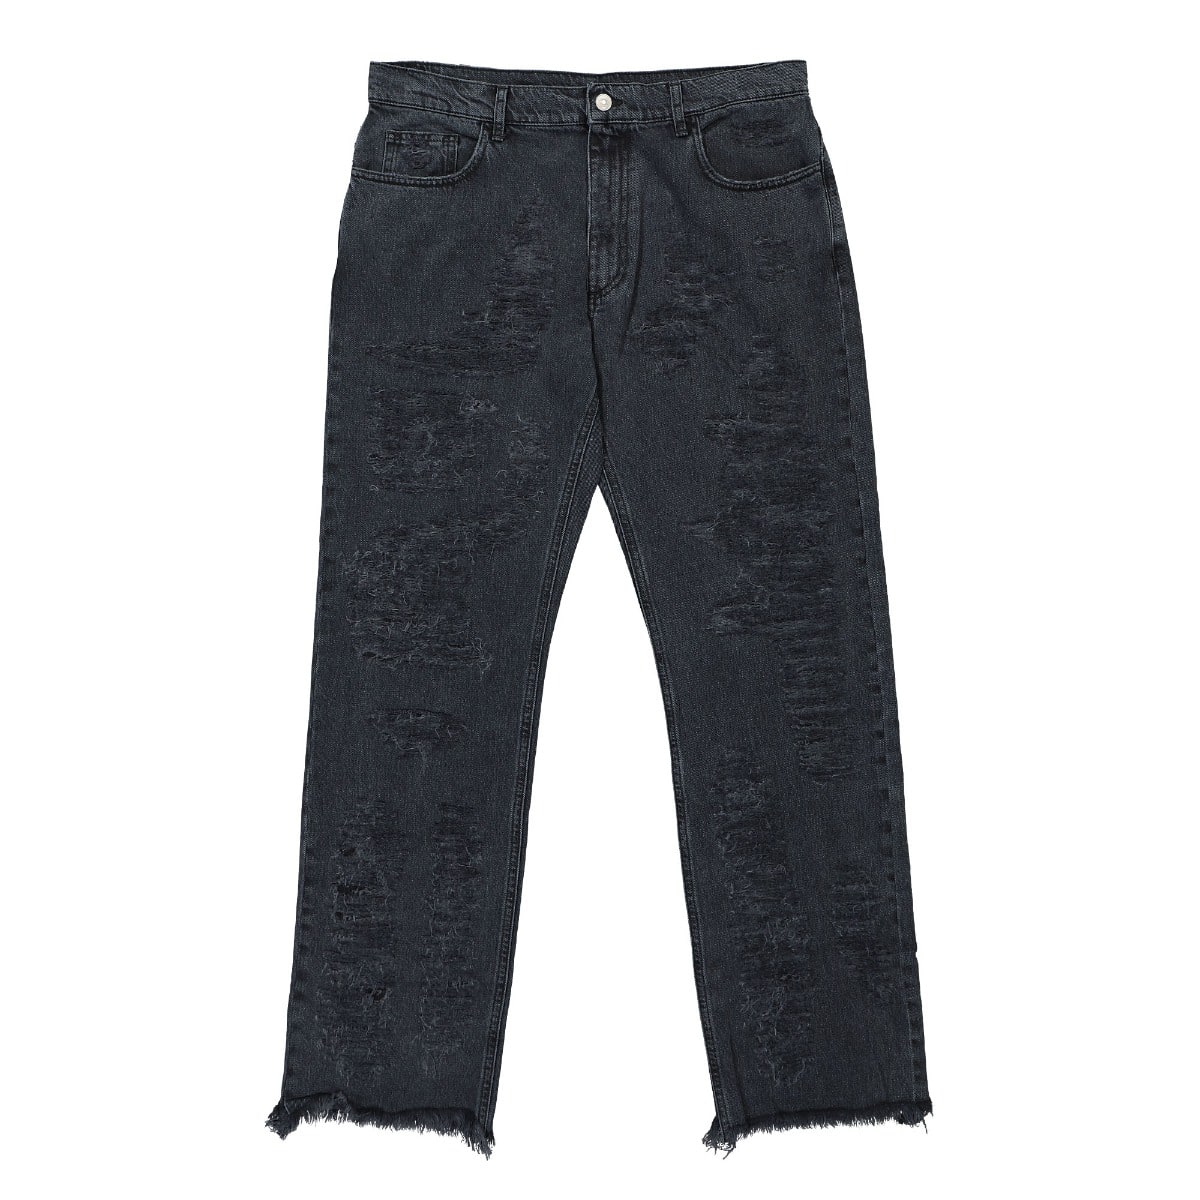 Destroyed Embroidery Jean